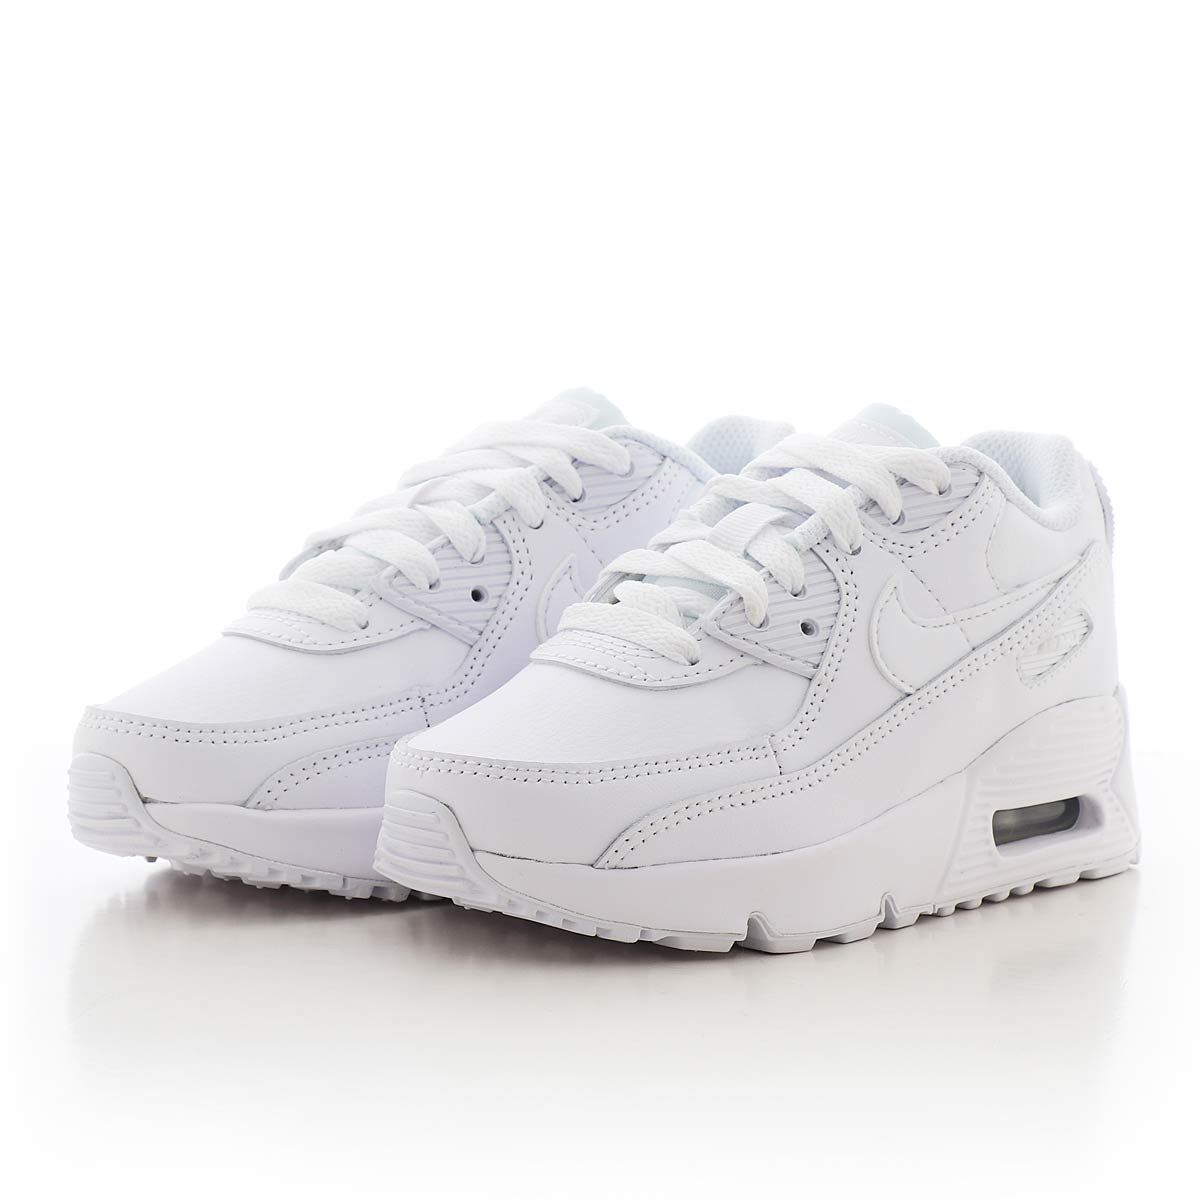 Buy AIR MAX 90 LTR (PS) for EUR 79.95 